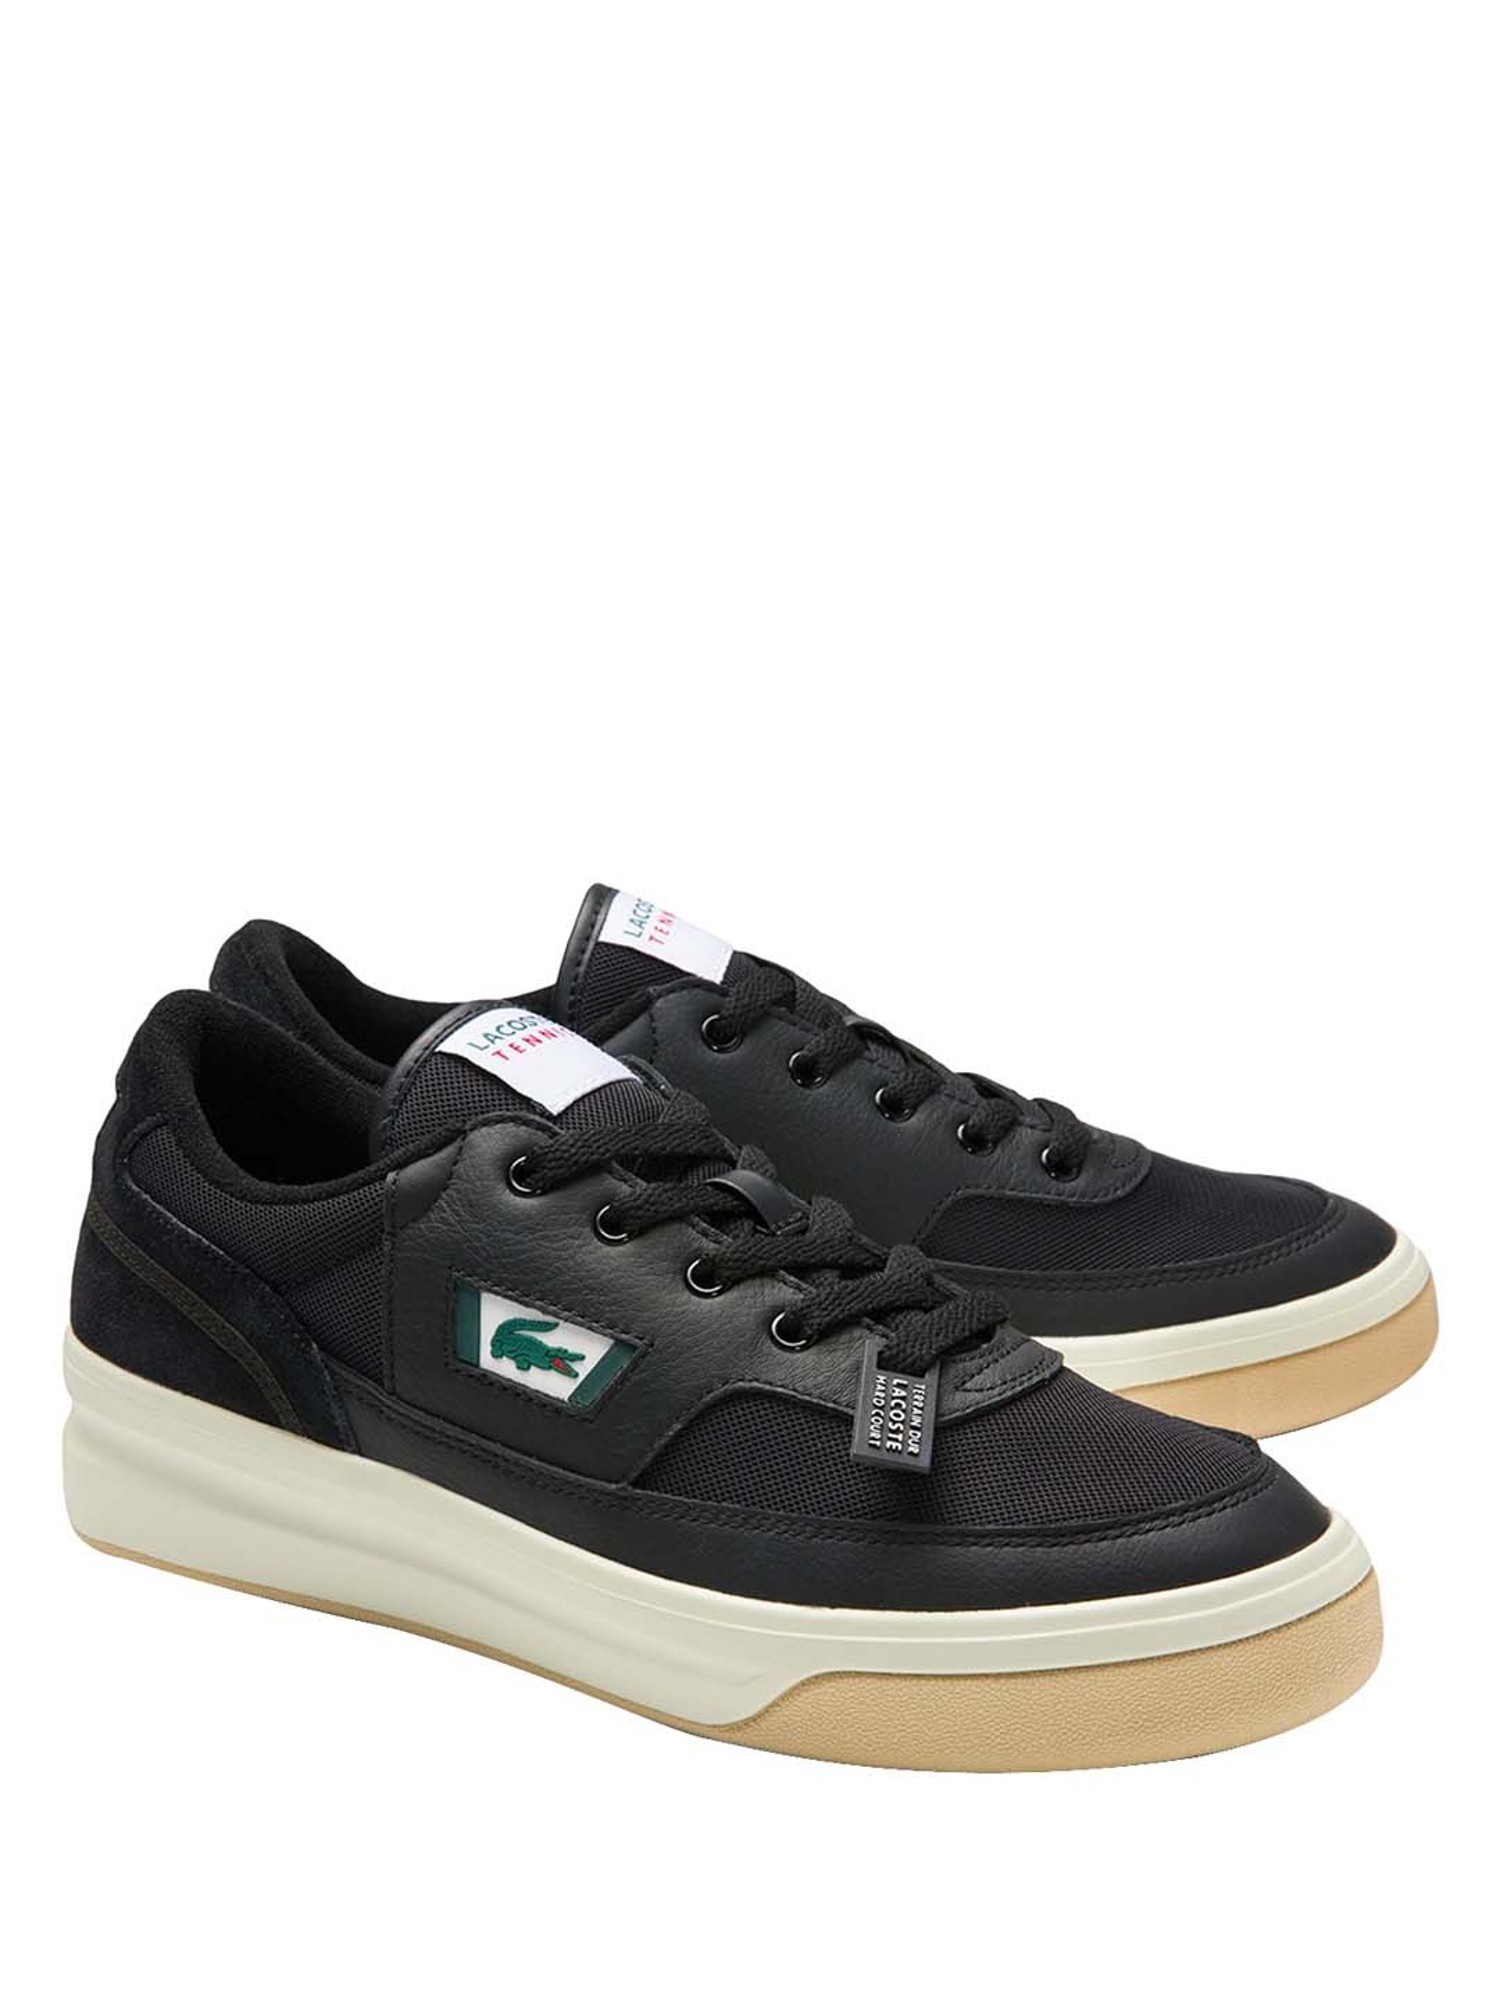 lacoste shoes in india price, Off 67%, njhvidberg.dk